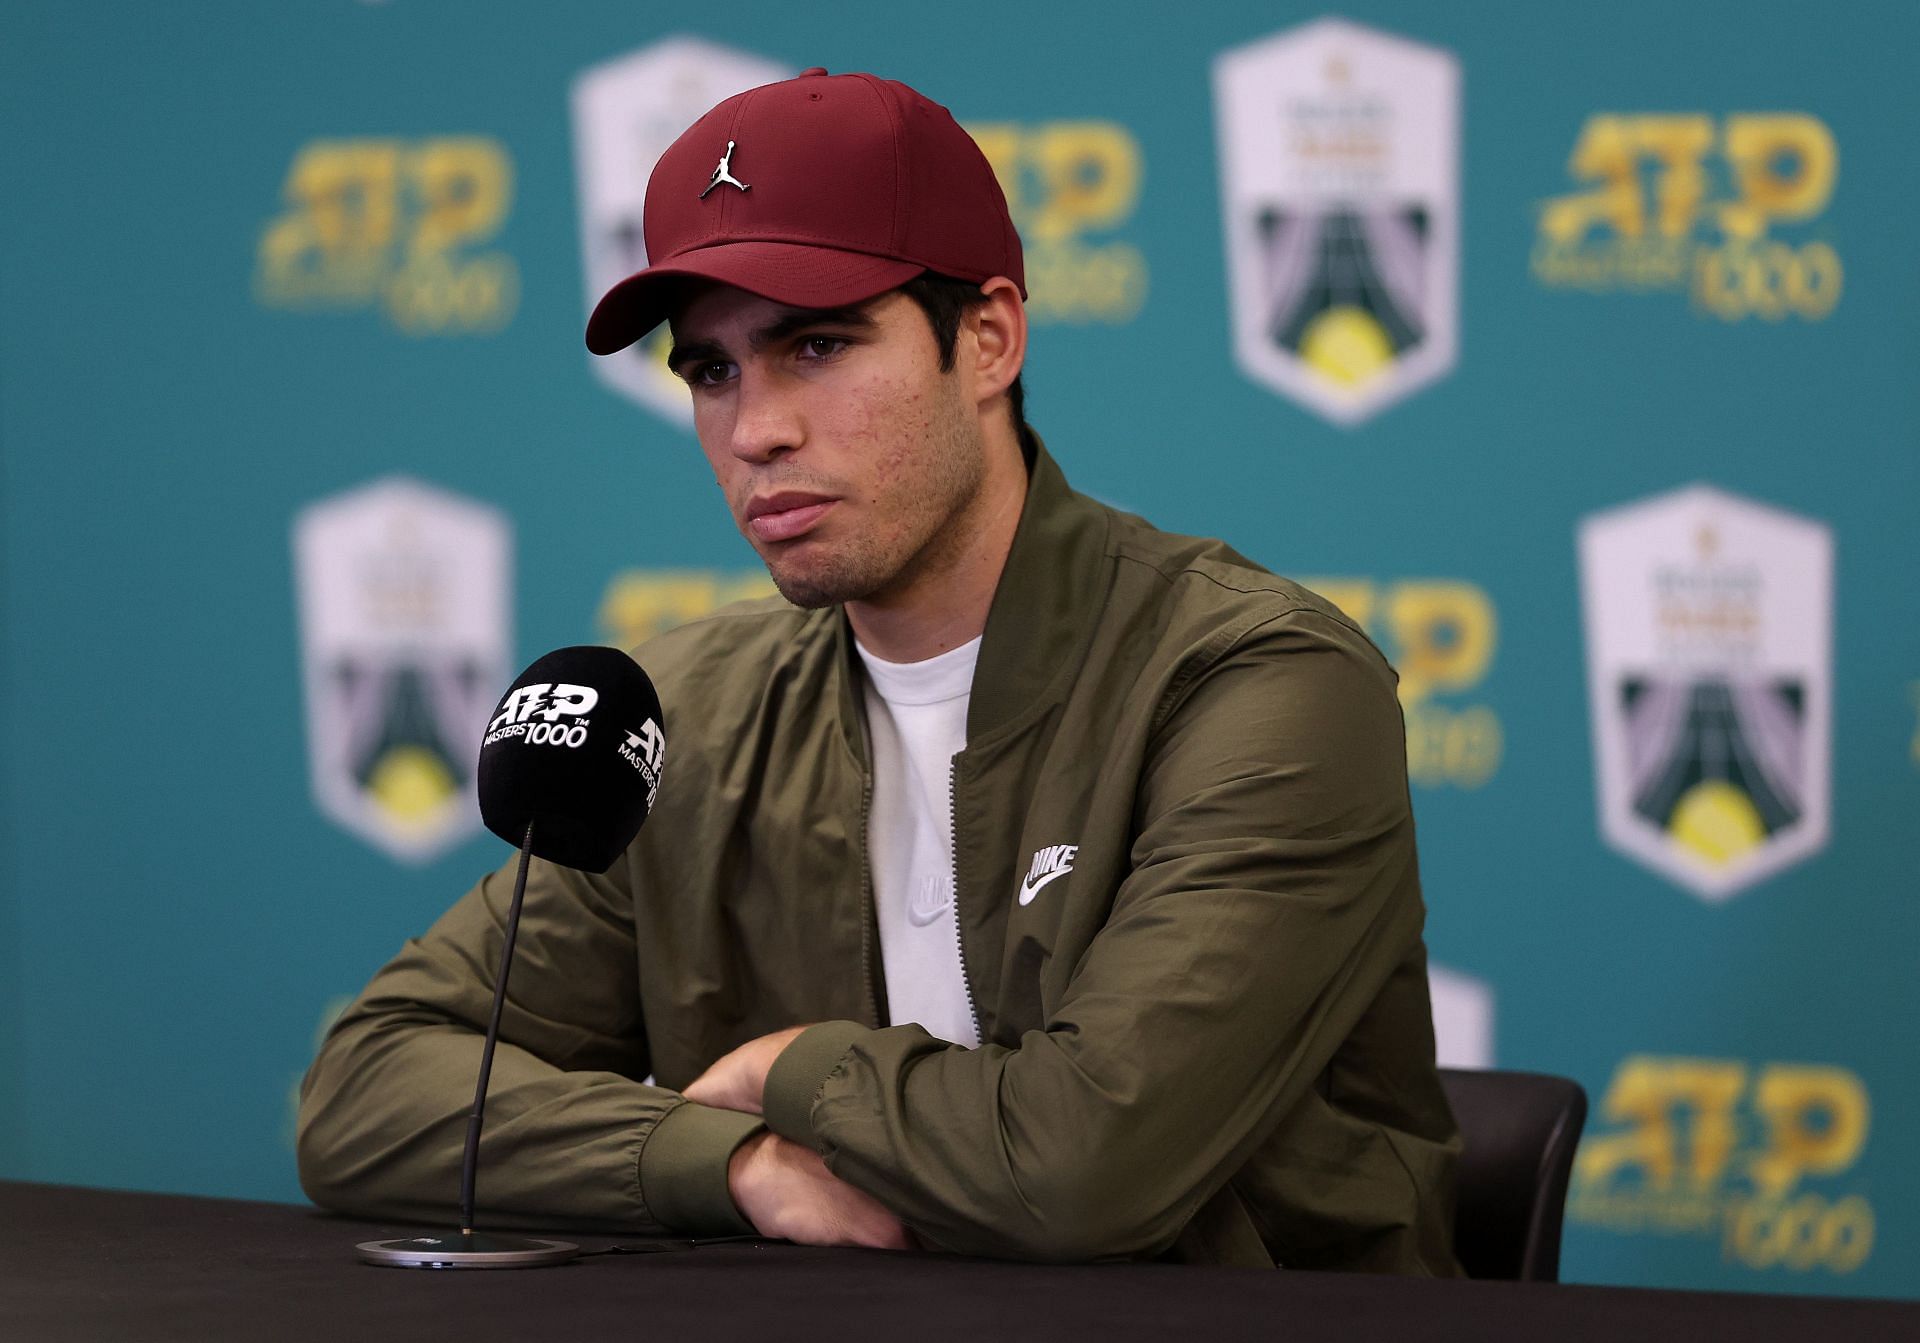 Carlos Alcaraz pictured during a press conference at the 2022 Paris Masters.